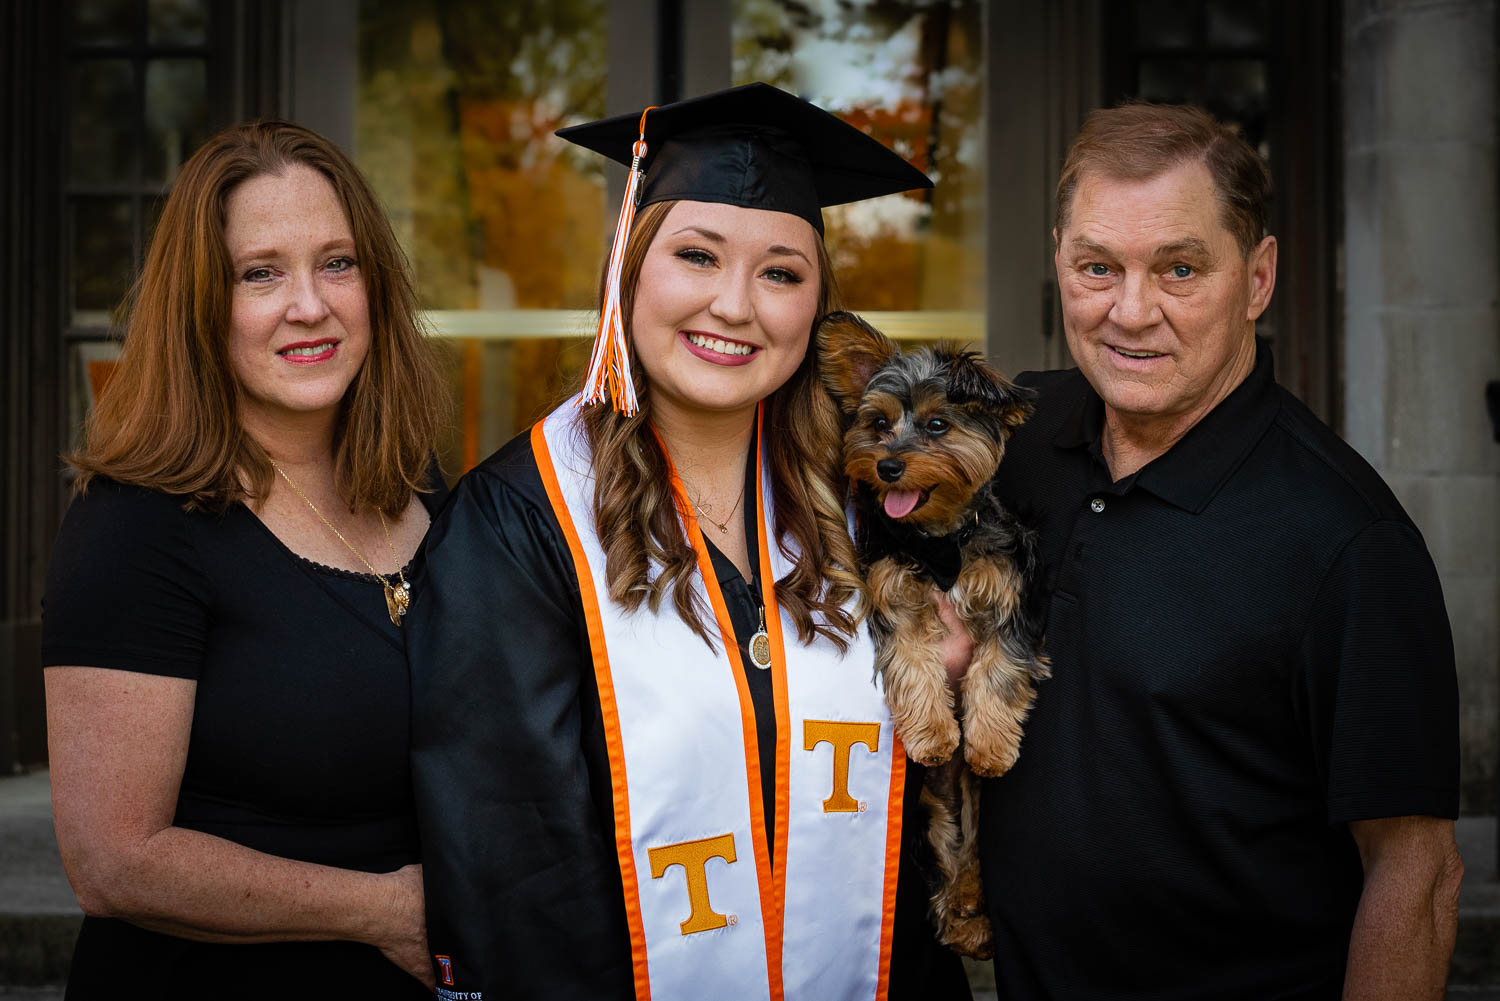 A UTK student at Morgan Hall with her parents and dog.